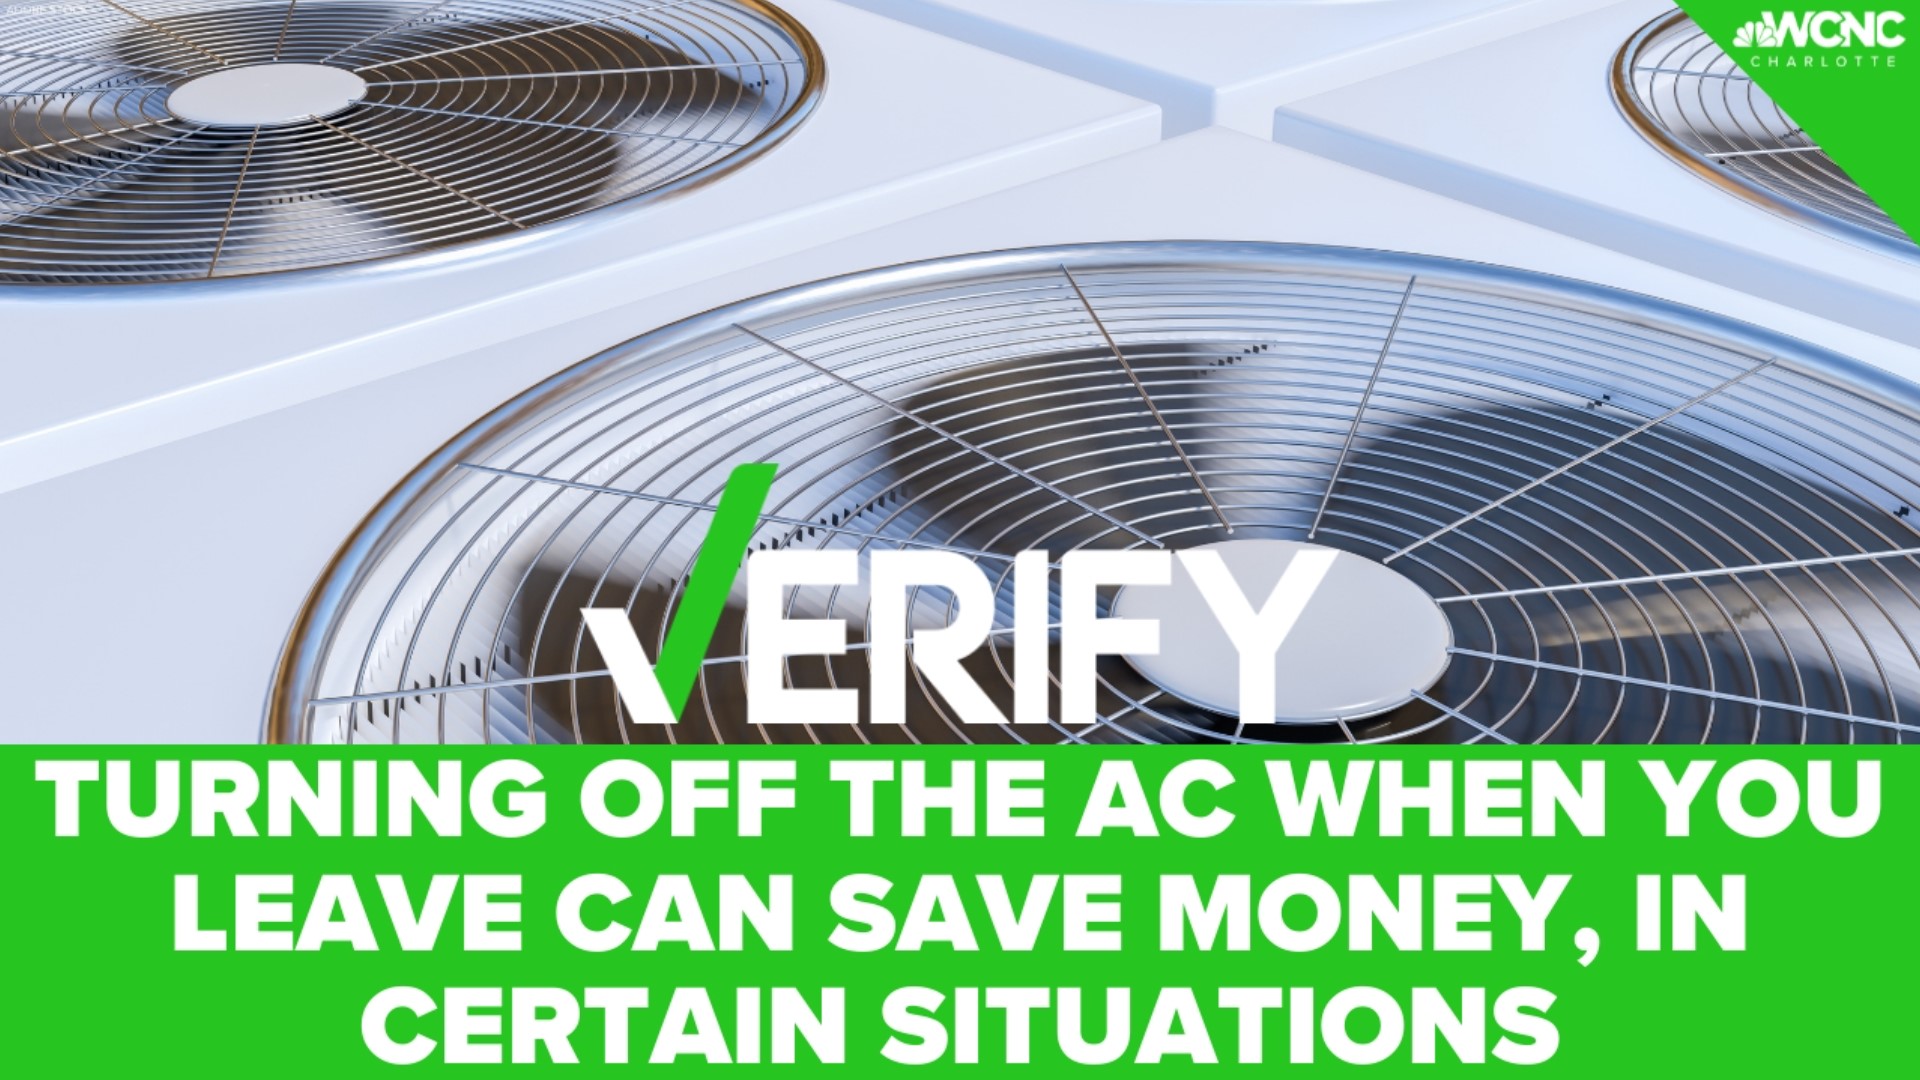 There's conflicting guidance on whether it's better to turn your AC off or down when you leave the house.